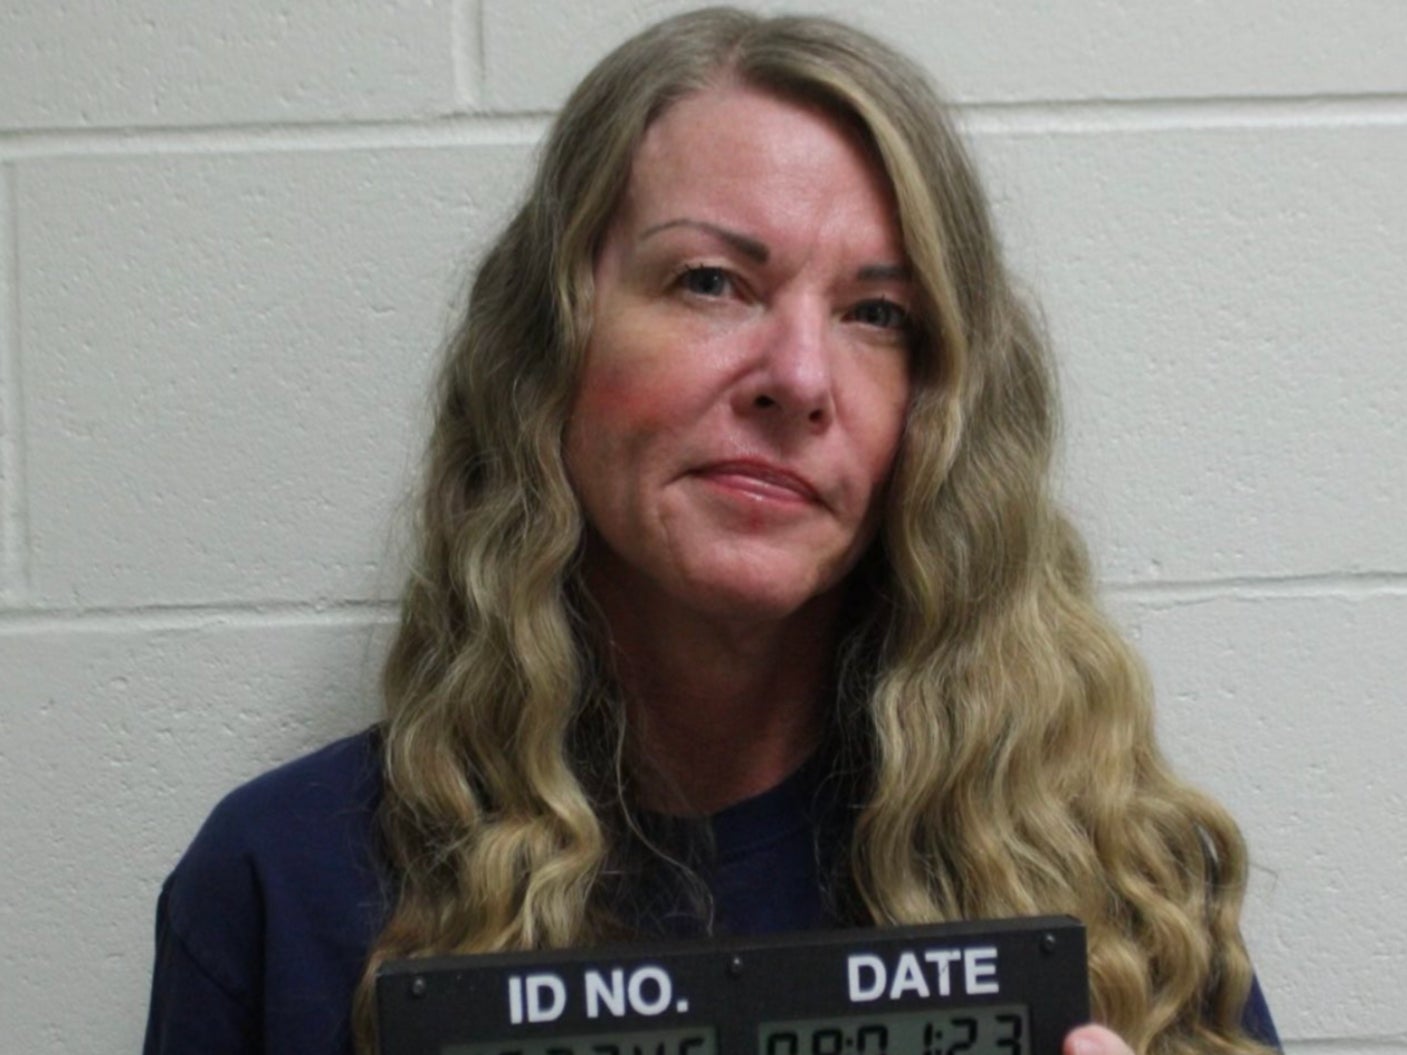 Lori Vallow smirks in her mug shot after being handed life without parole in July